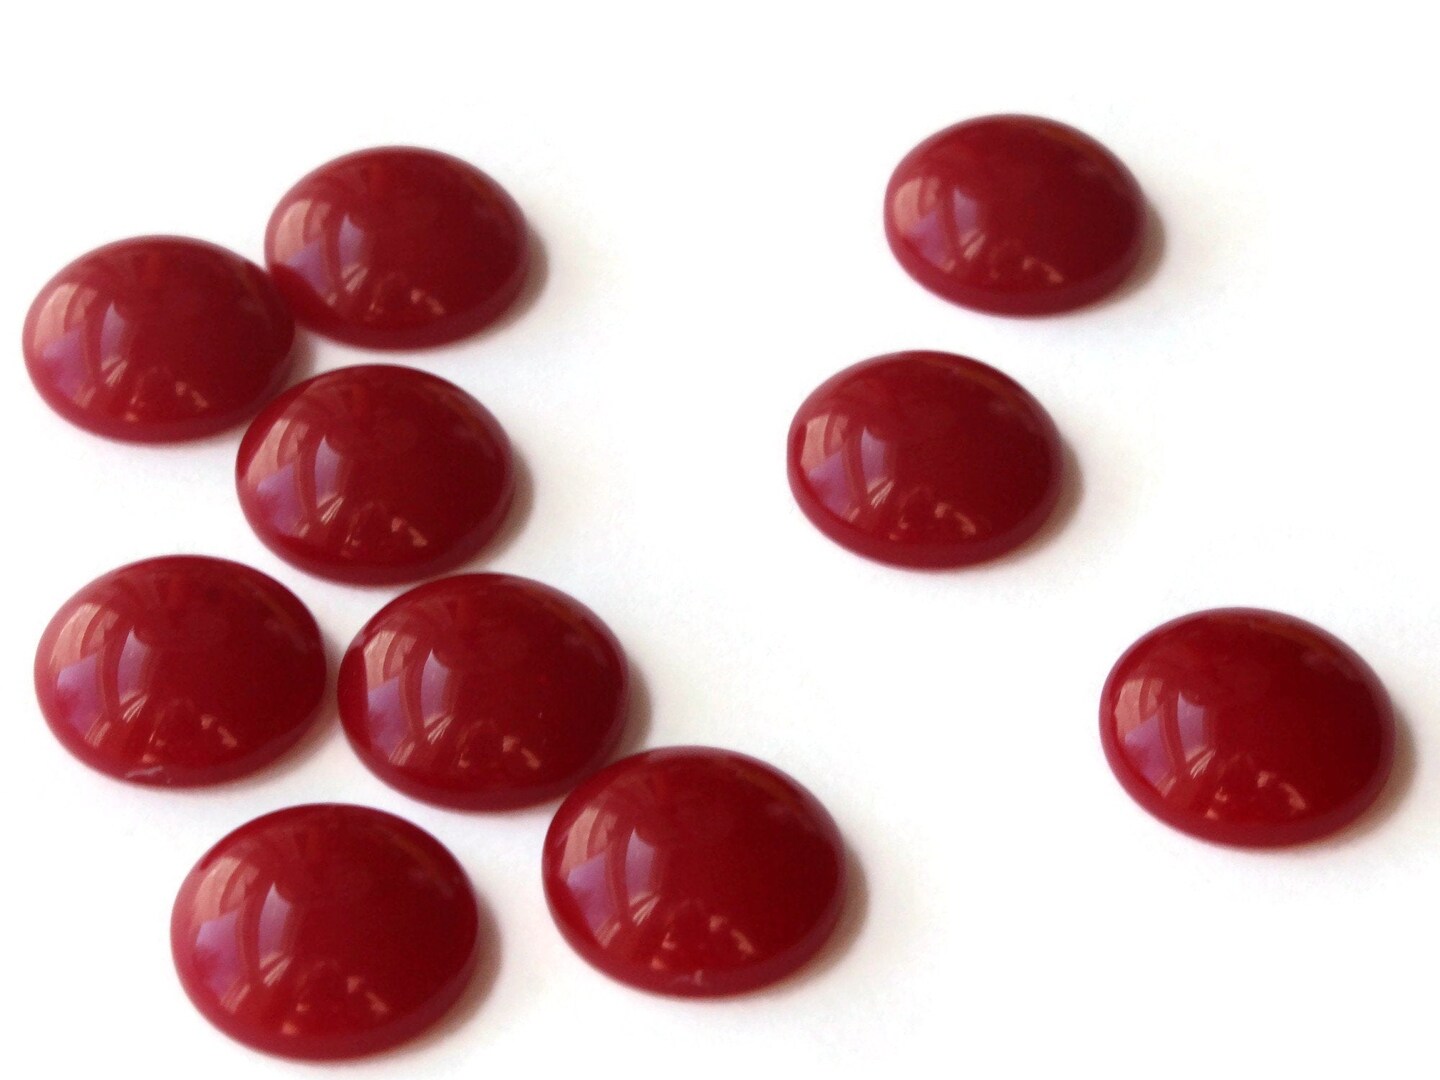 10 13mm Round Dark Red Cabochons Vintage Japanese Lucite Cabochons Plastic Cabochons